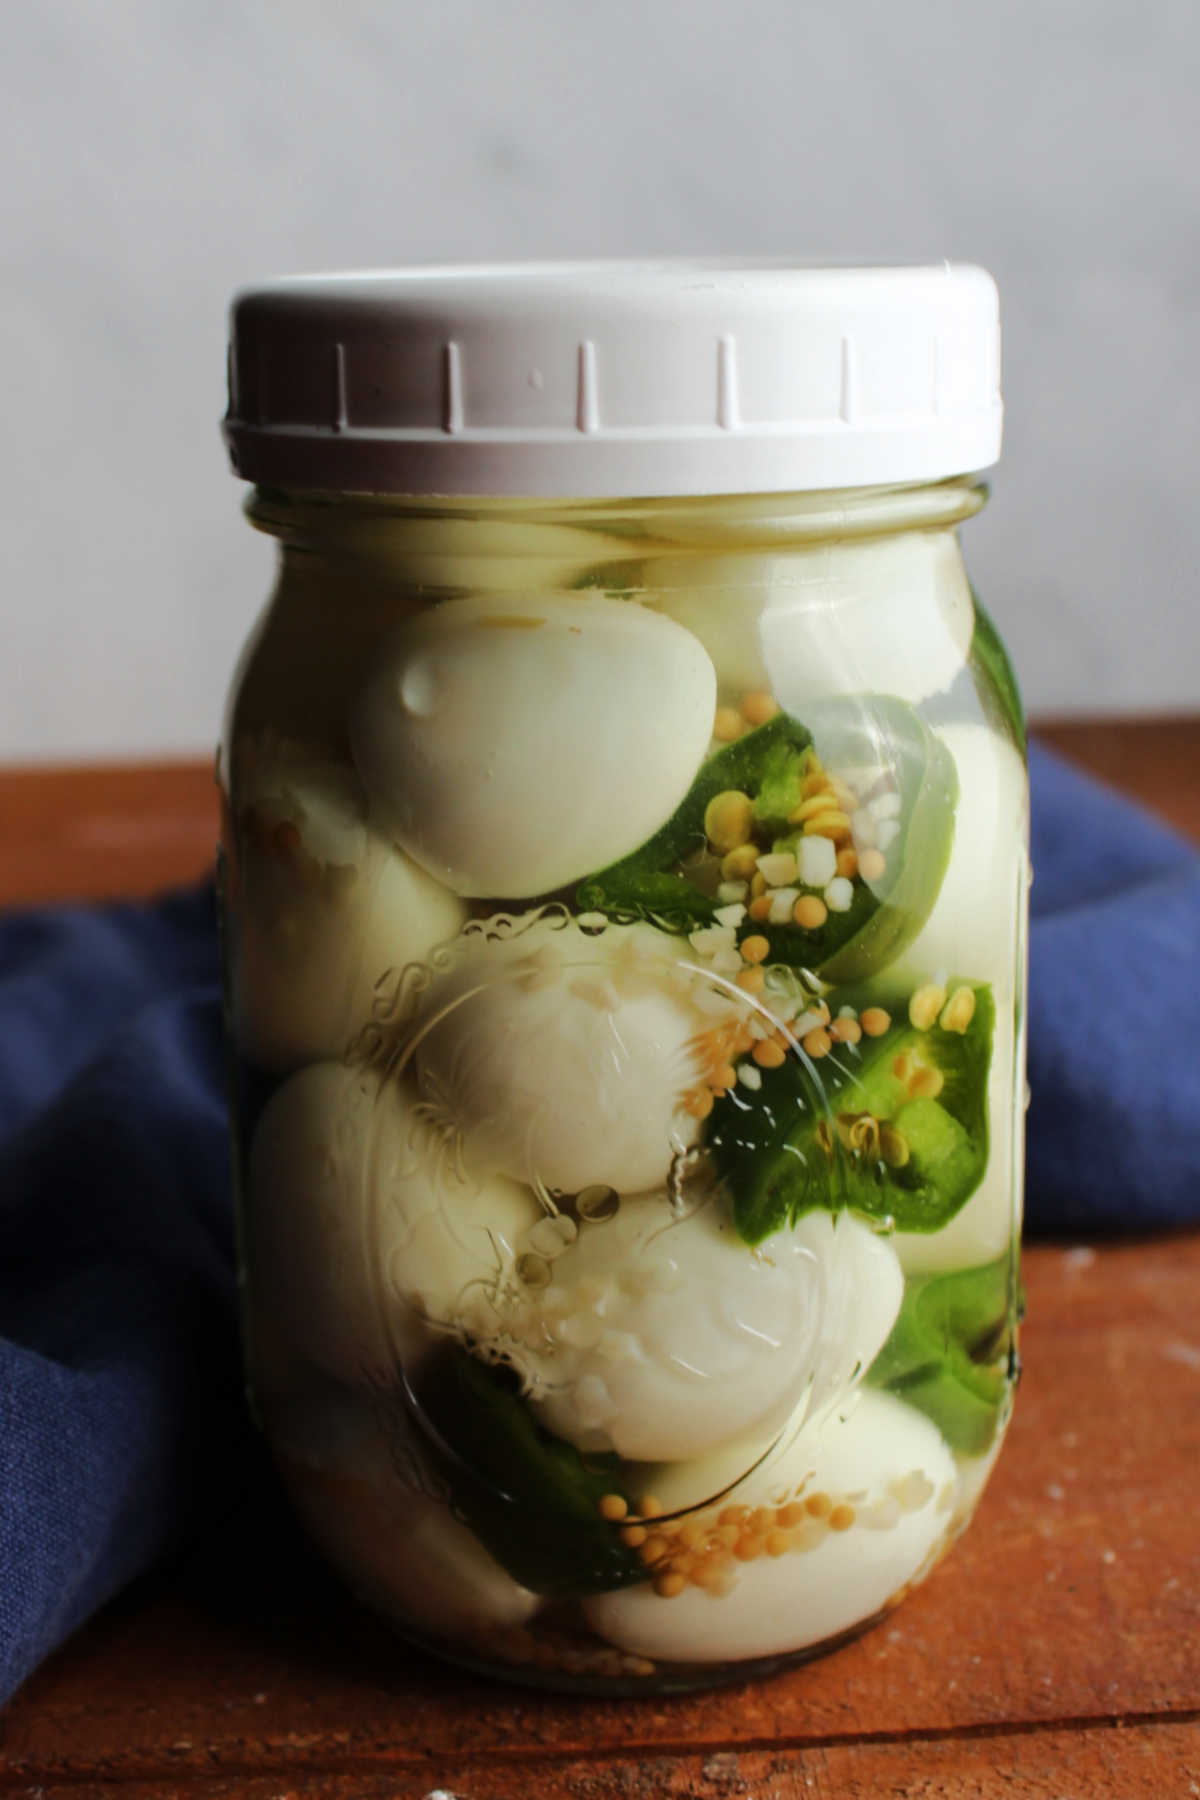 Glass pint jar filled with quail eggs, sliced jalapeno pepper and vinegar pickling liquid.